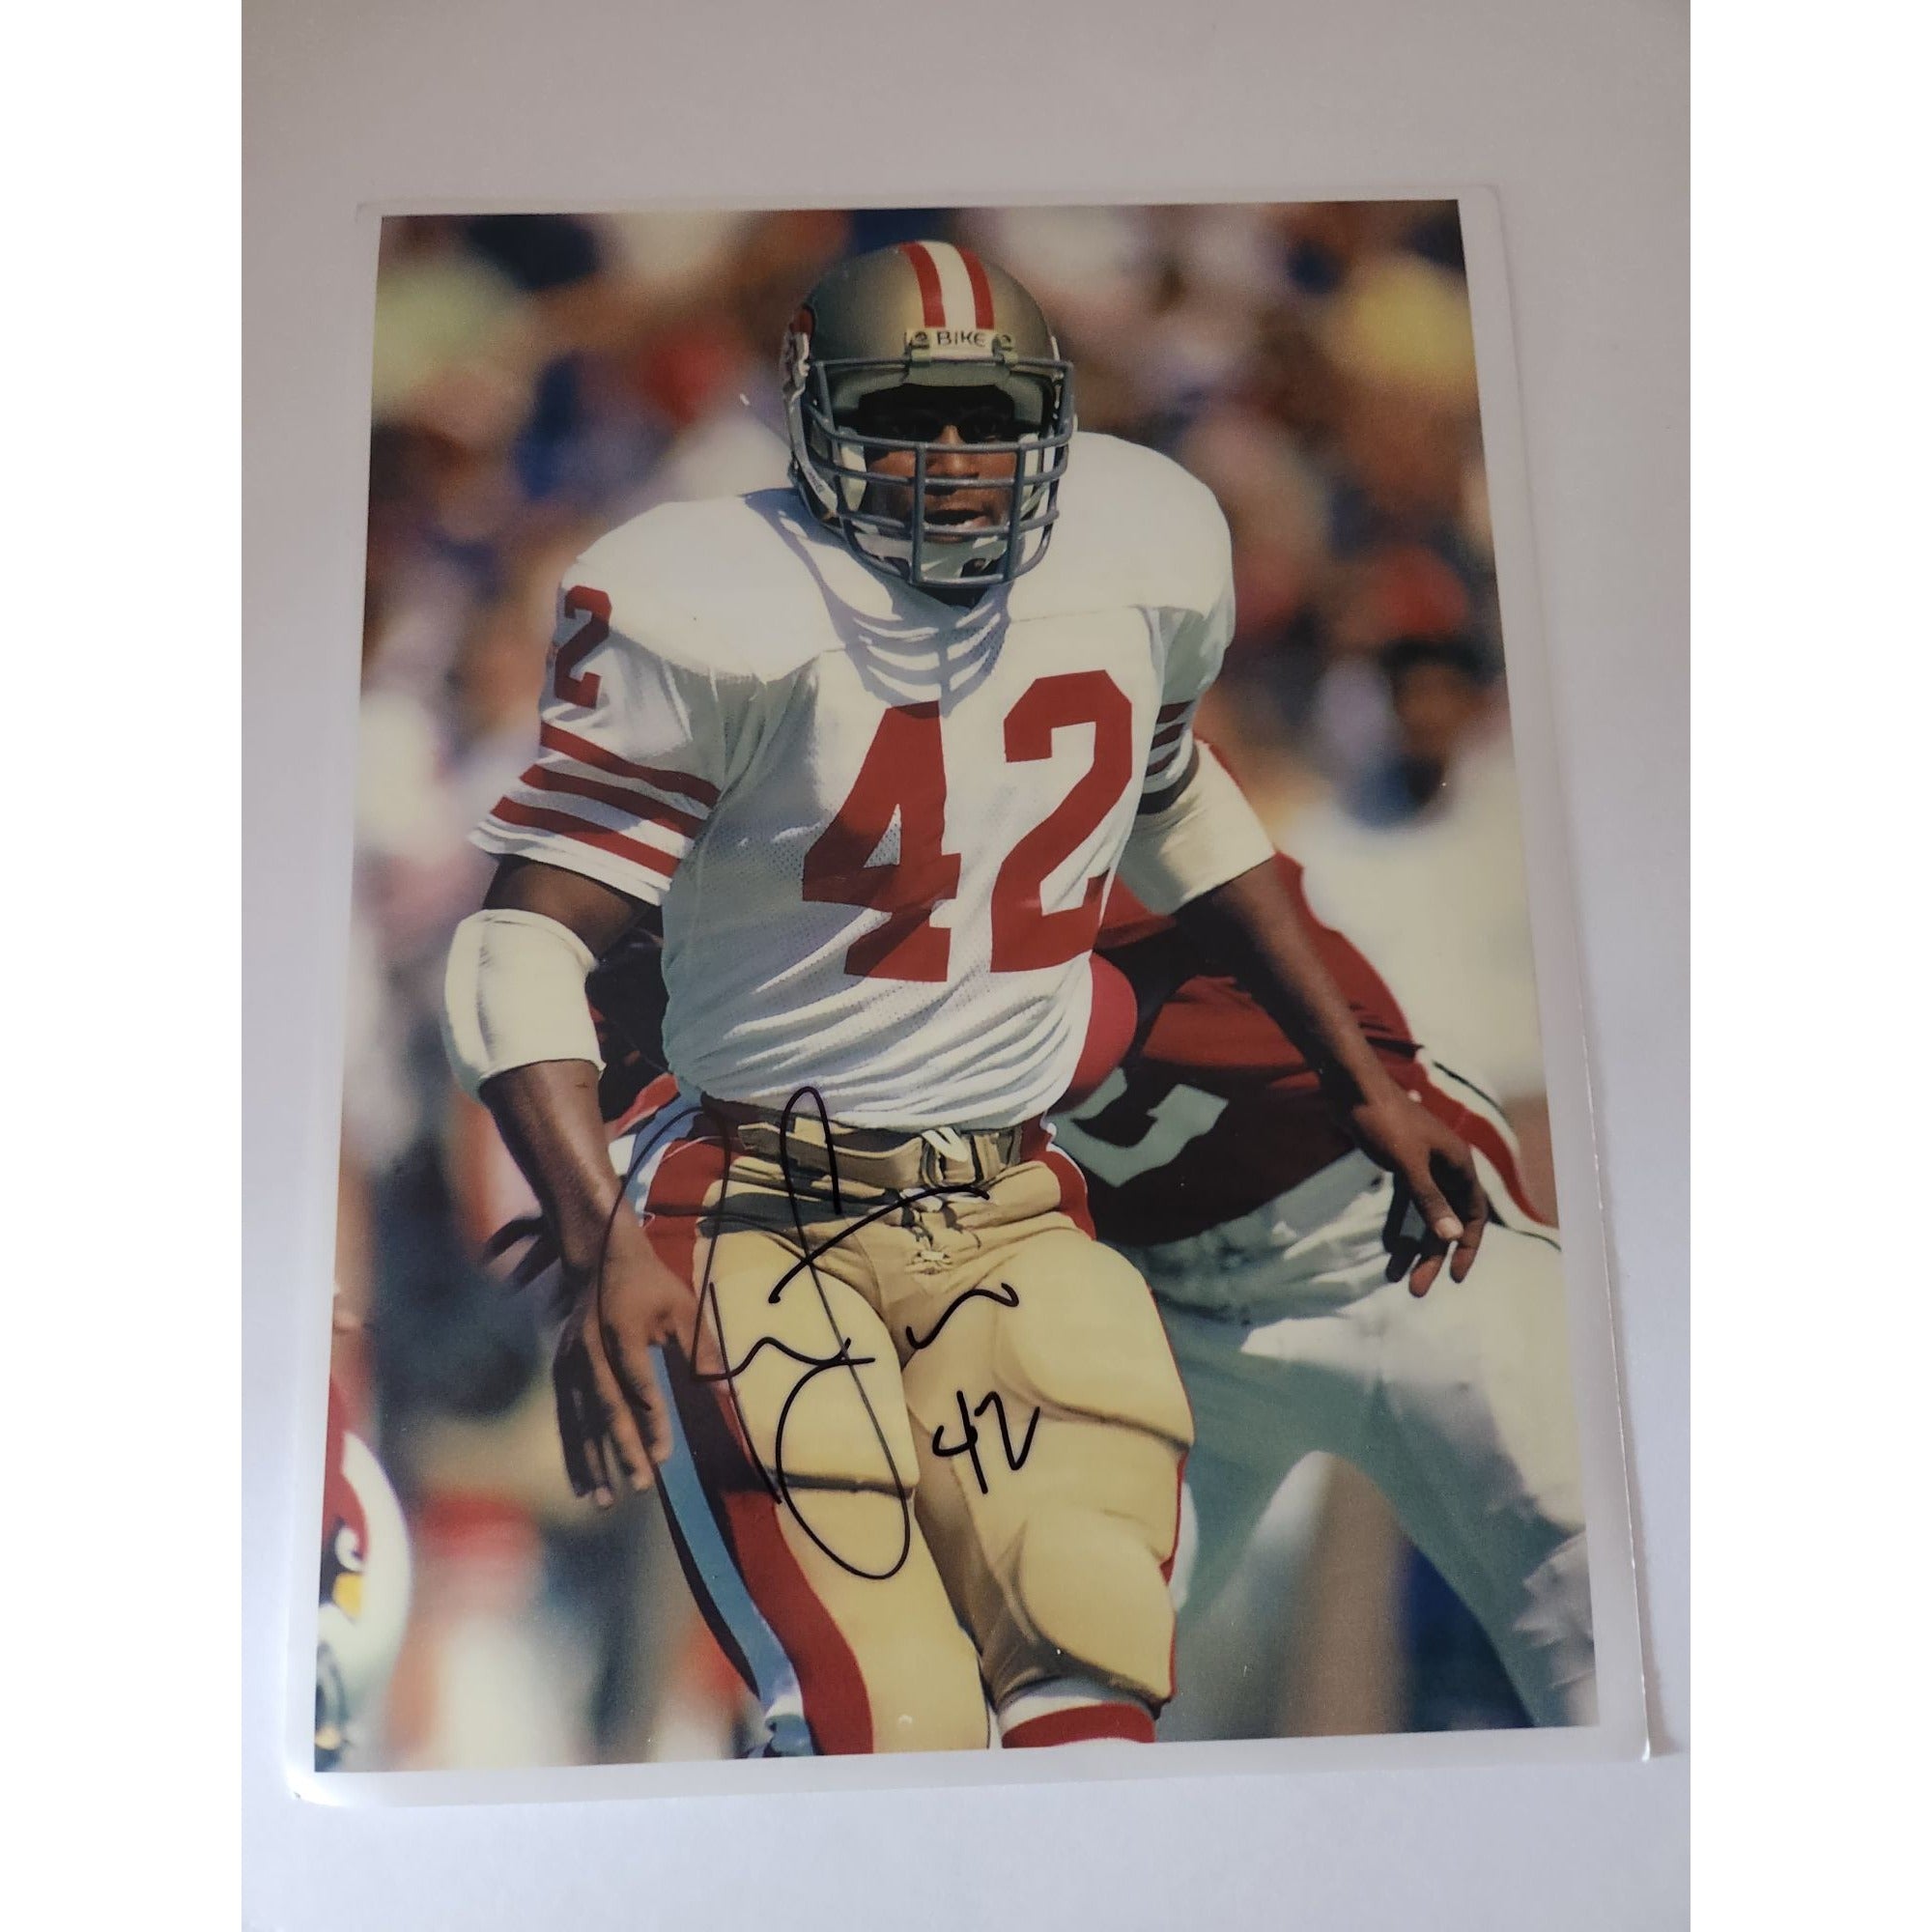 Ronnie Lott San Francisco 49ers Hall of Famer 8x10 photo signed